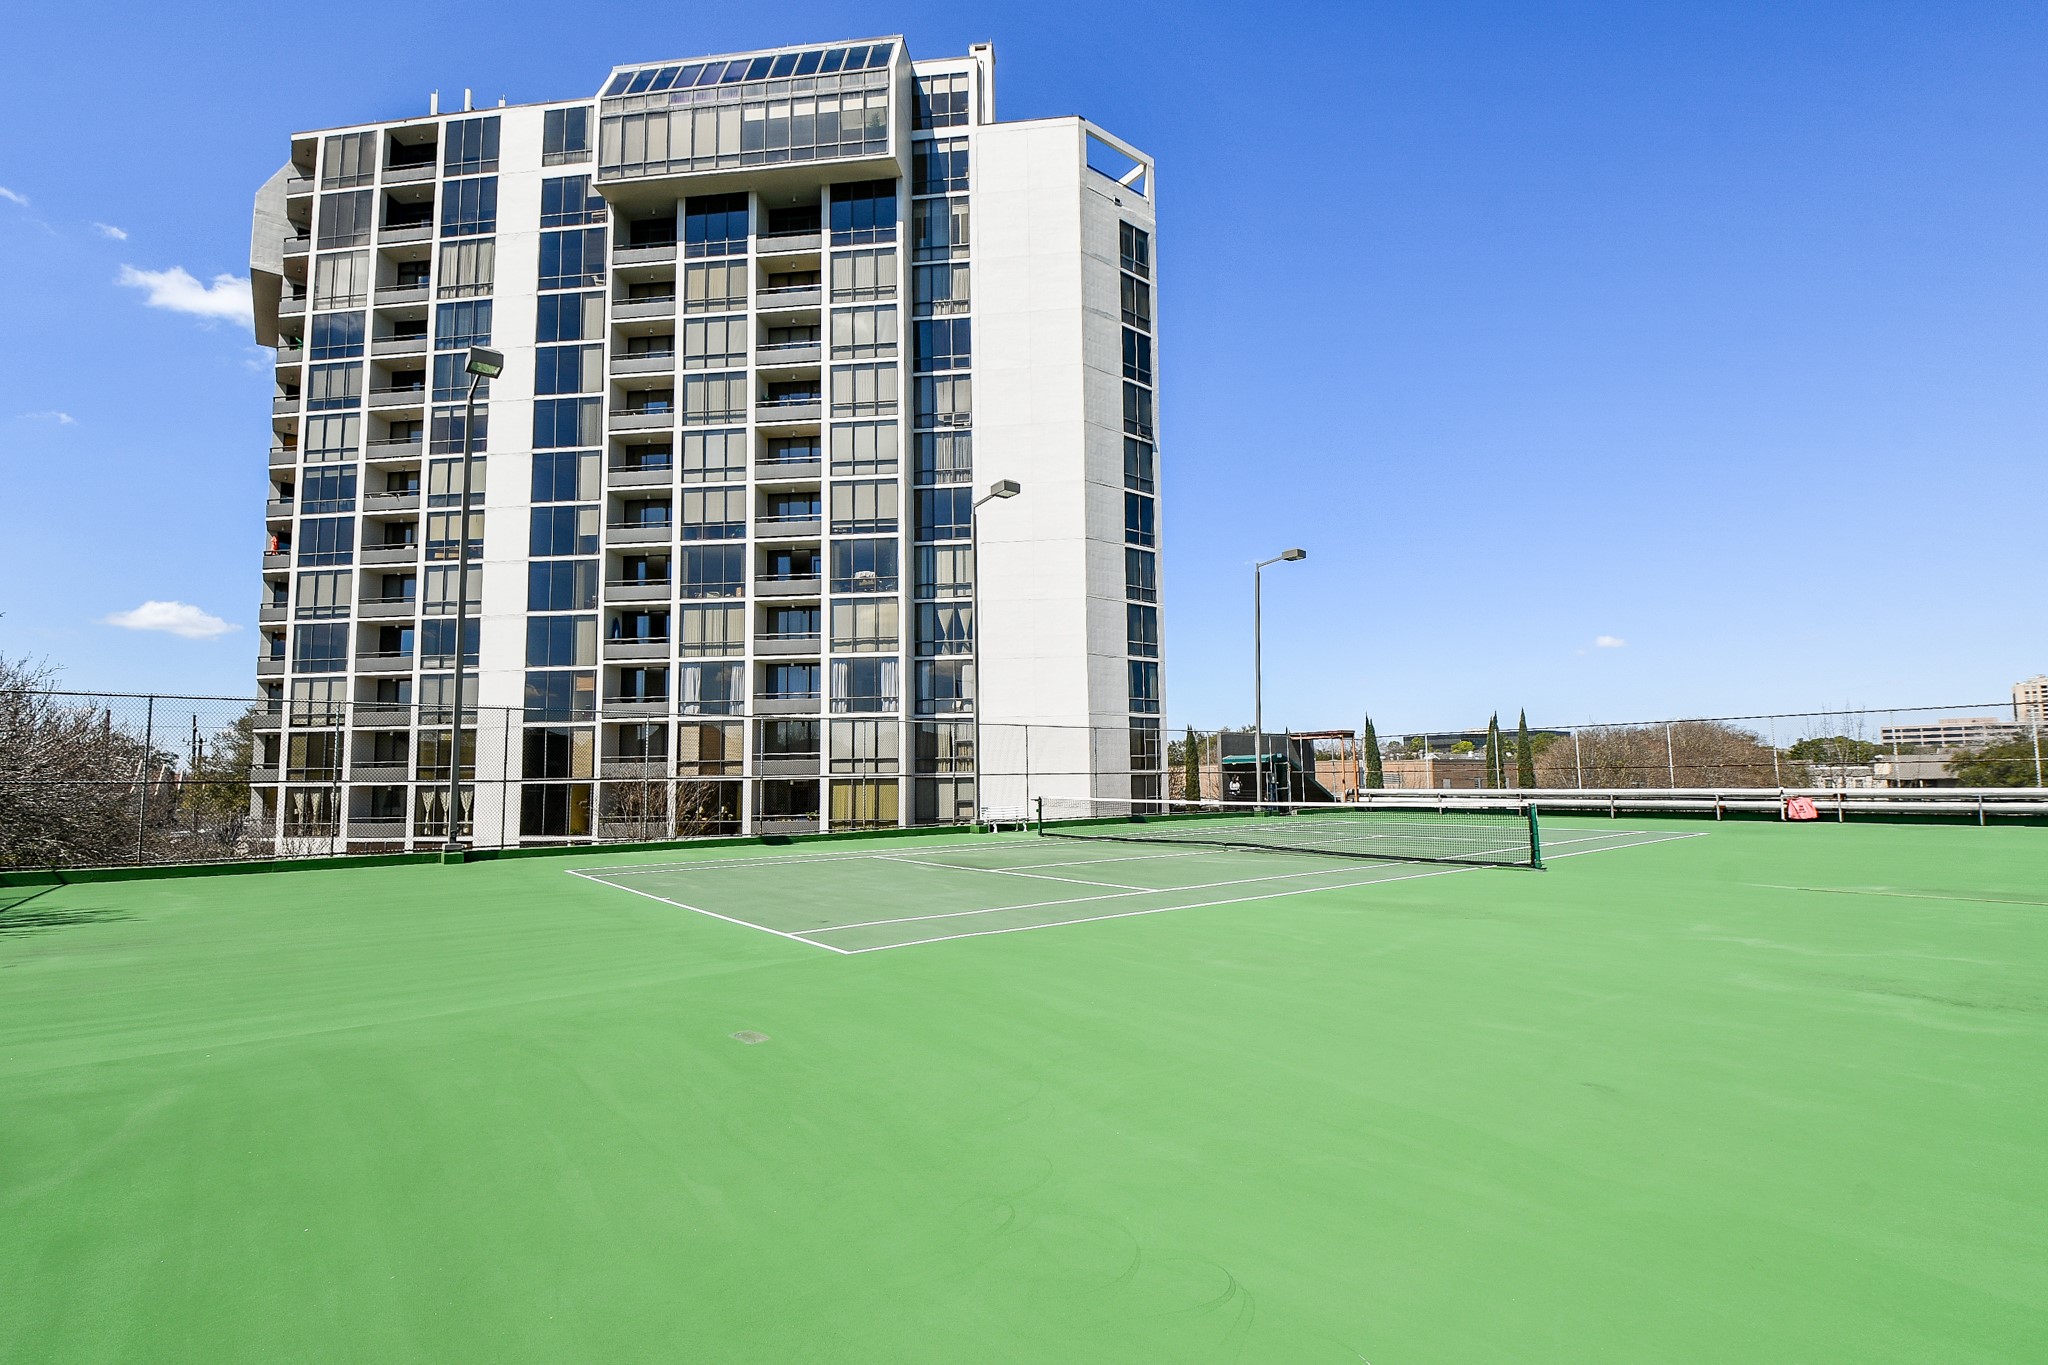 Located above the parking garage are tennis & basketball courts.